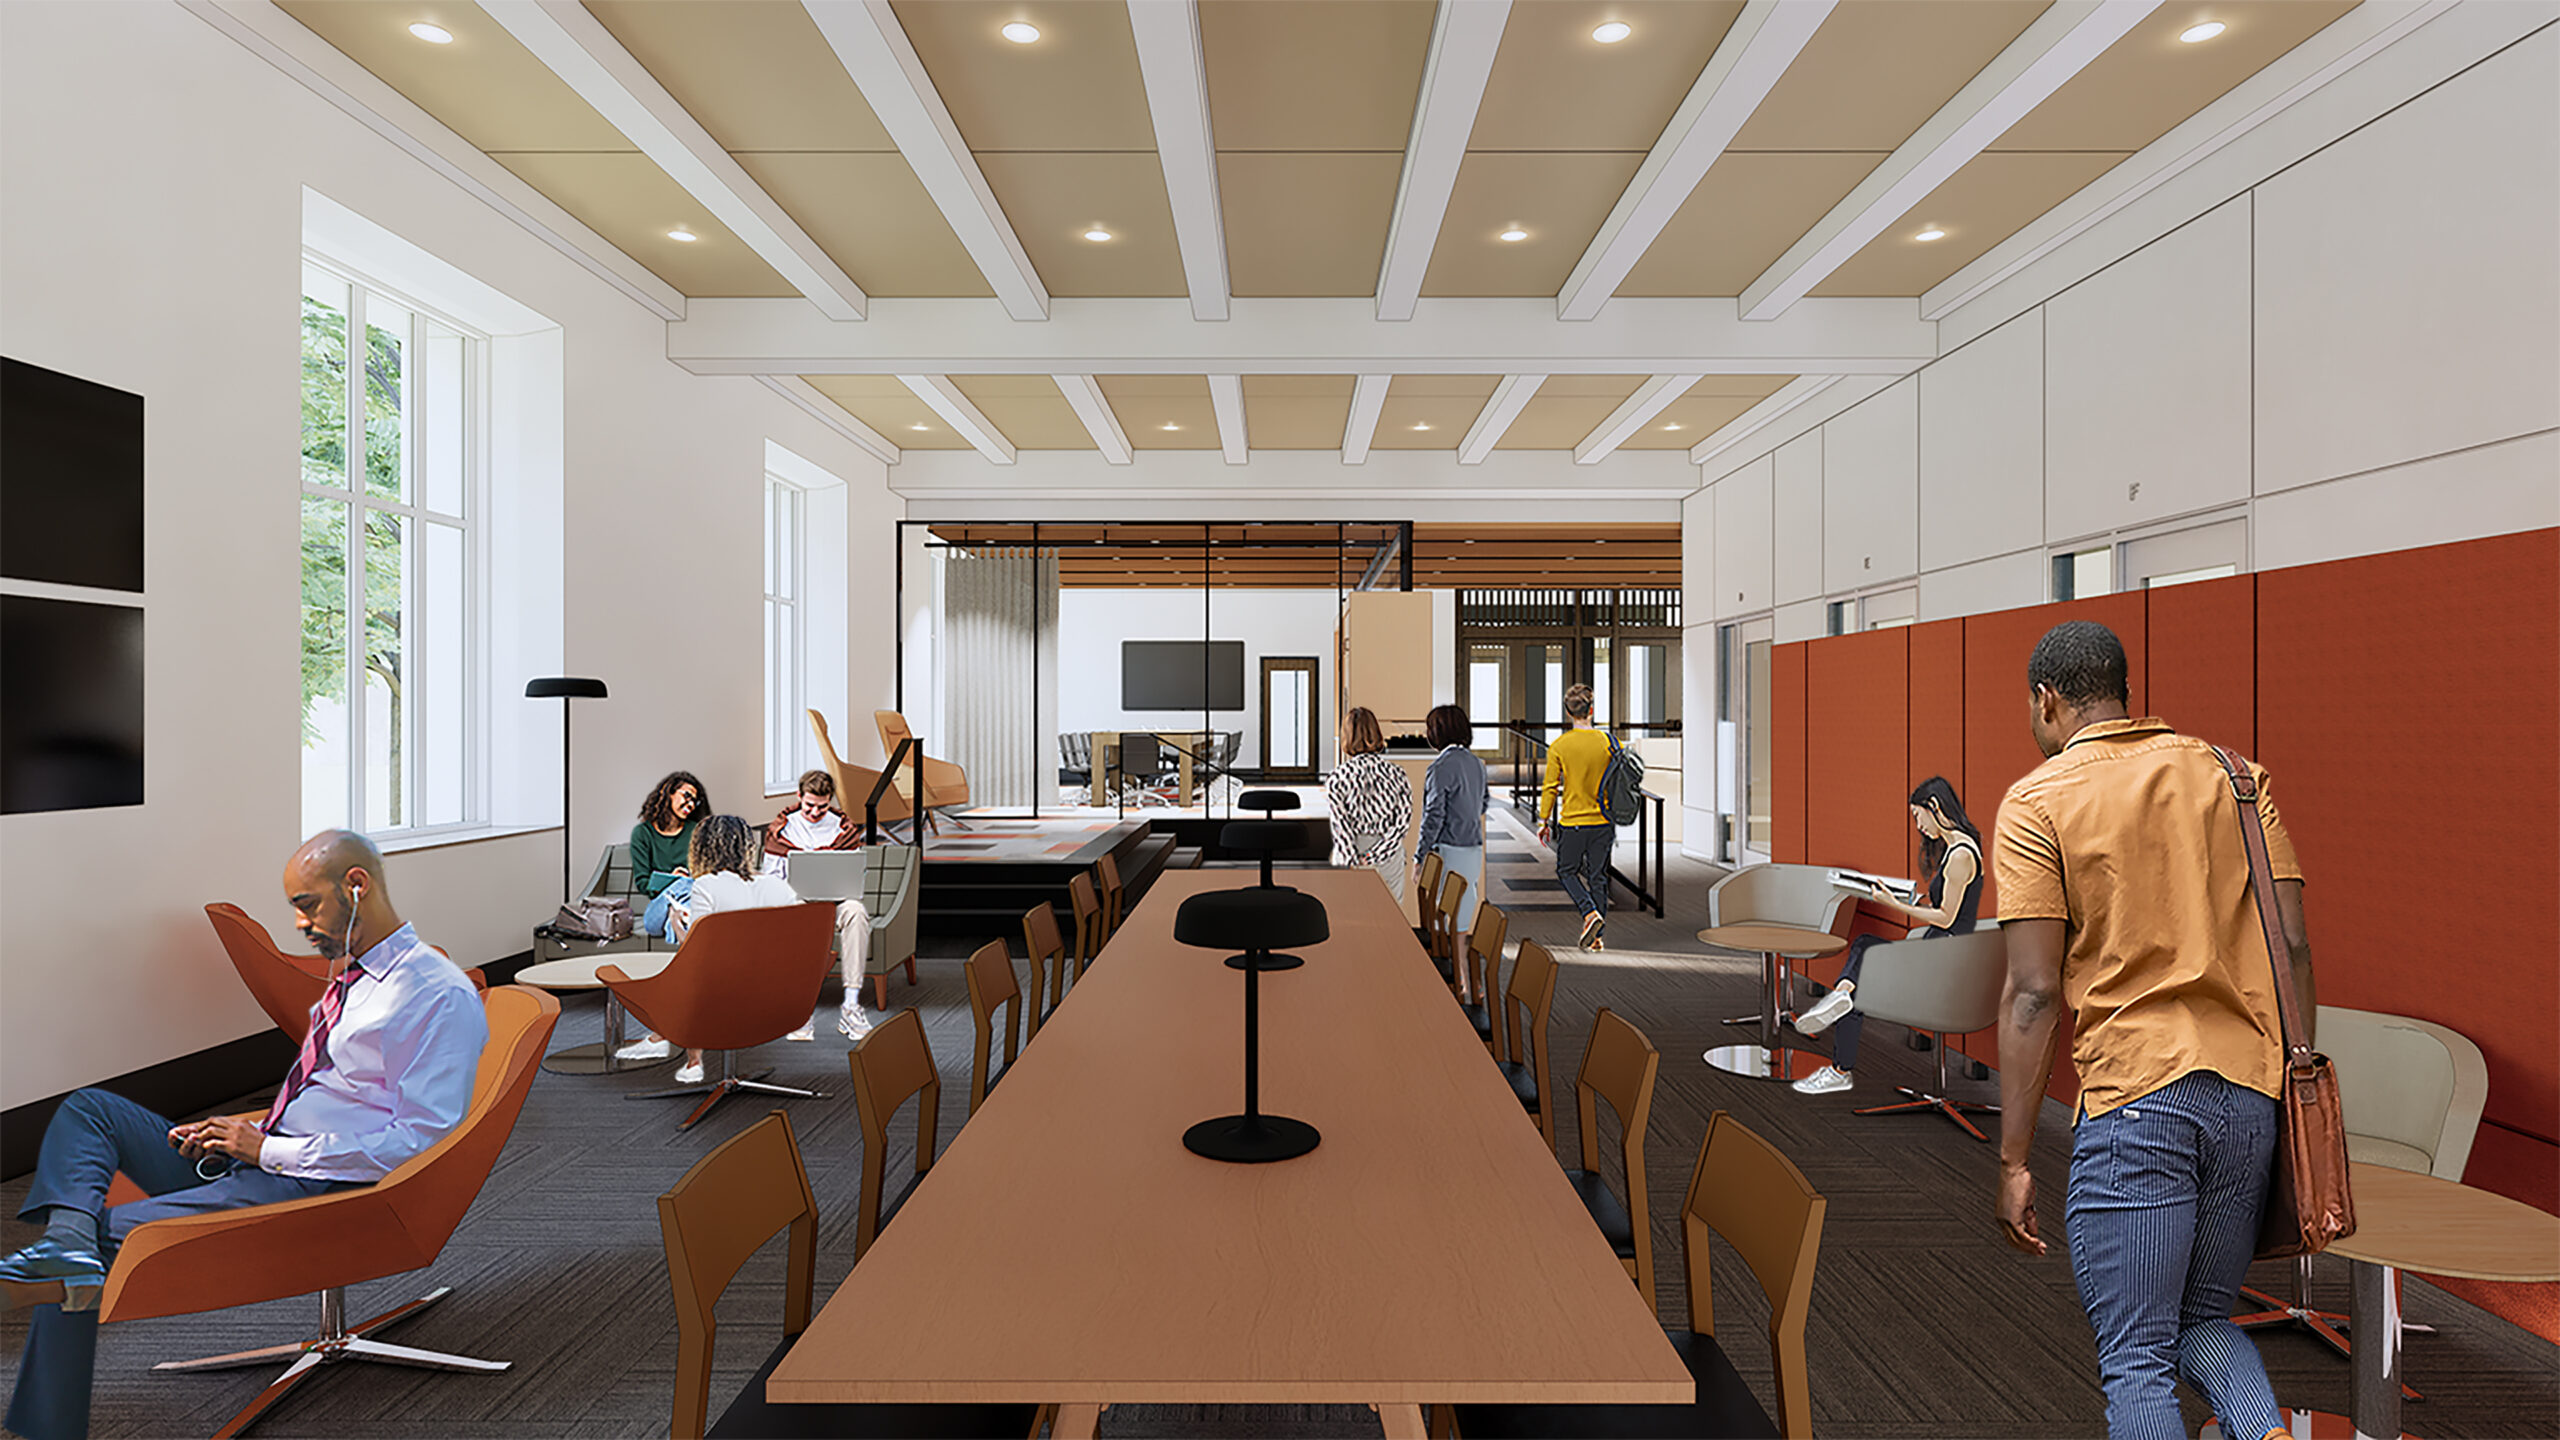 rendering of University of Texas financial wellness center with long table (vertically) in middle of open space room and small individual seating and tables along each side, glass walled conference room in background of image